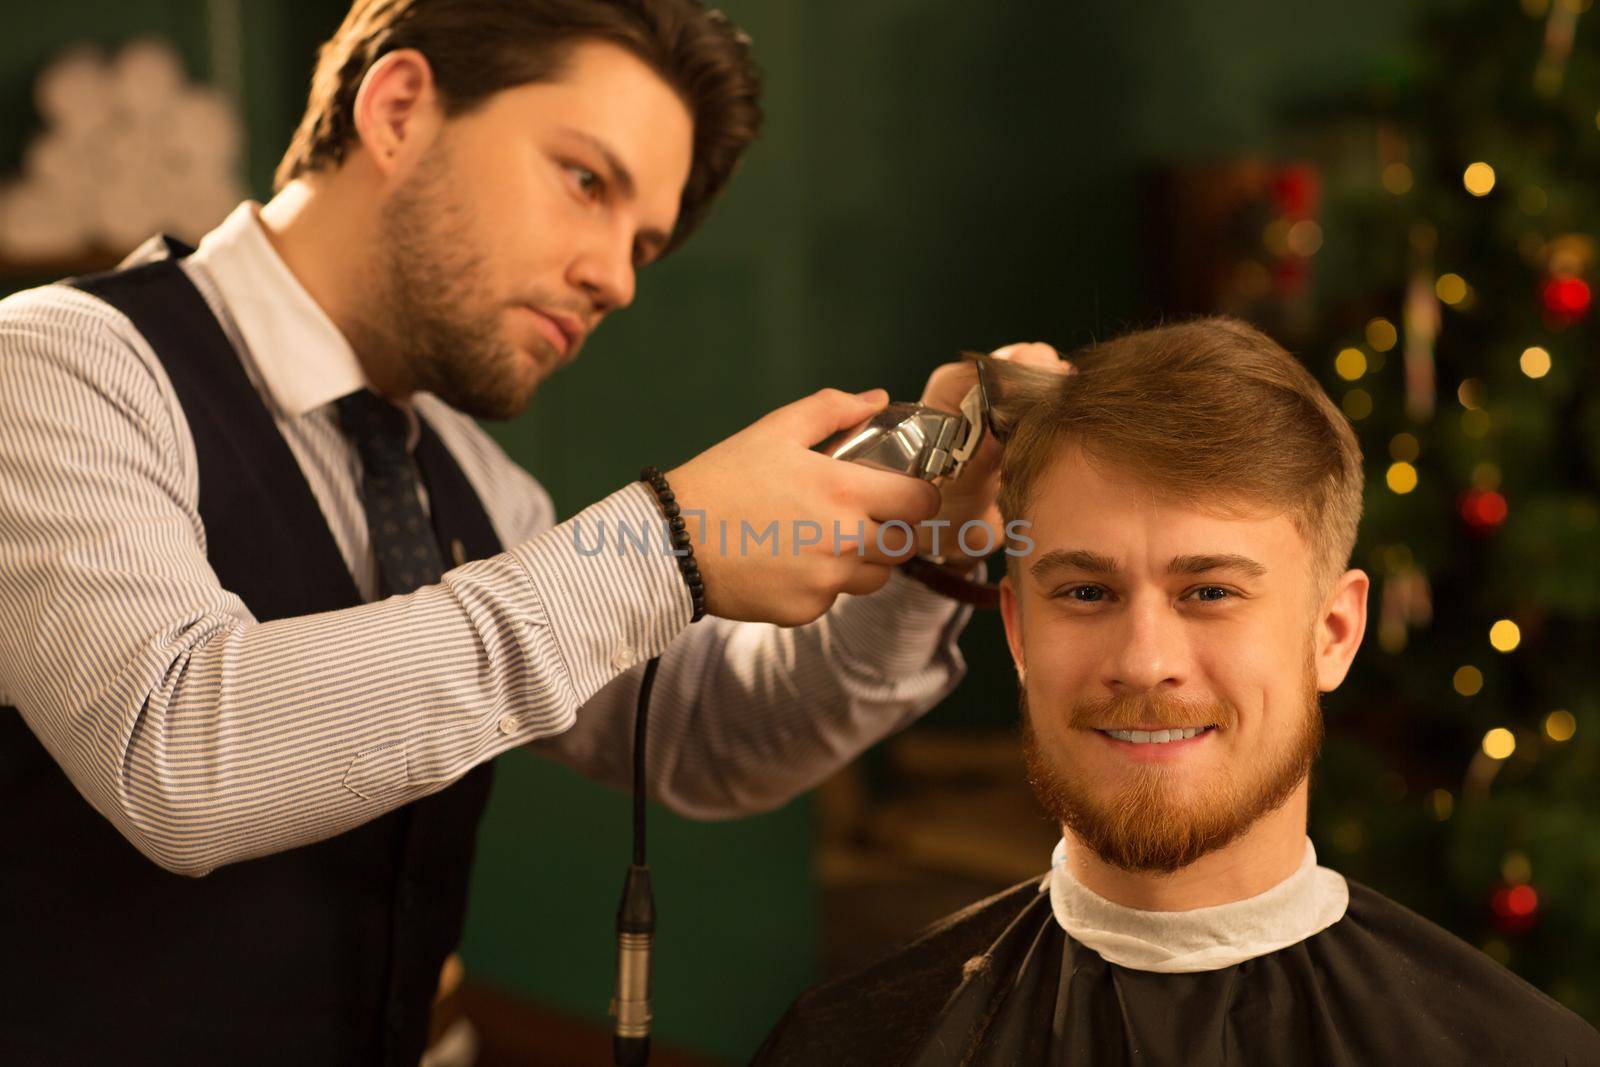 Cheerful handsome young bearded man smiling joyfully to the camera while getting a new haircut by professional barber at the local barbershop copyspace customer client service lifestyle wellbeing grooming.